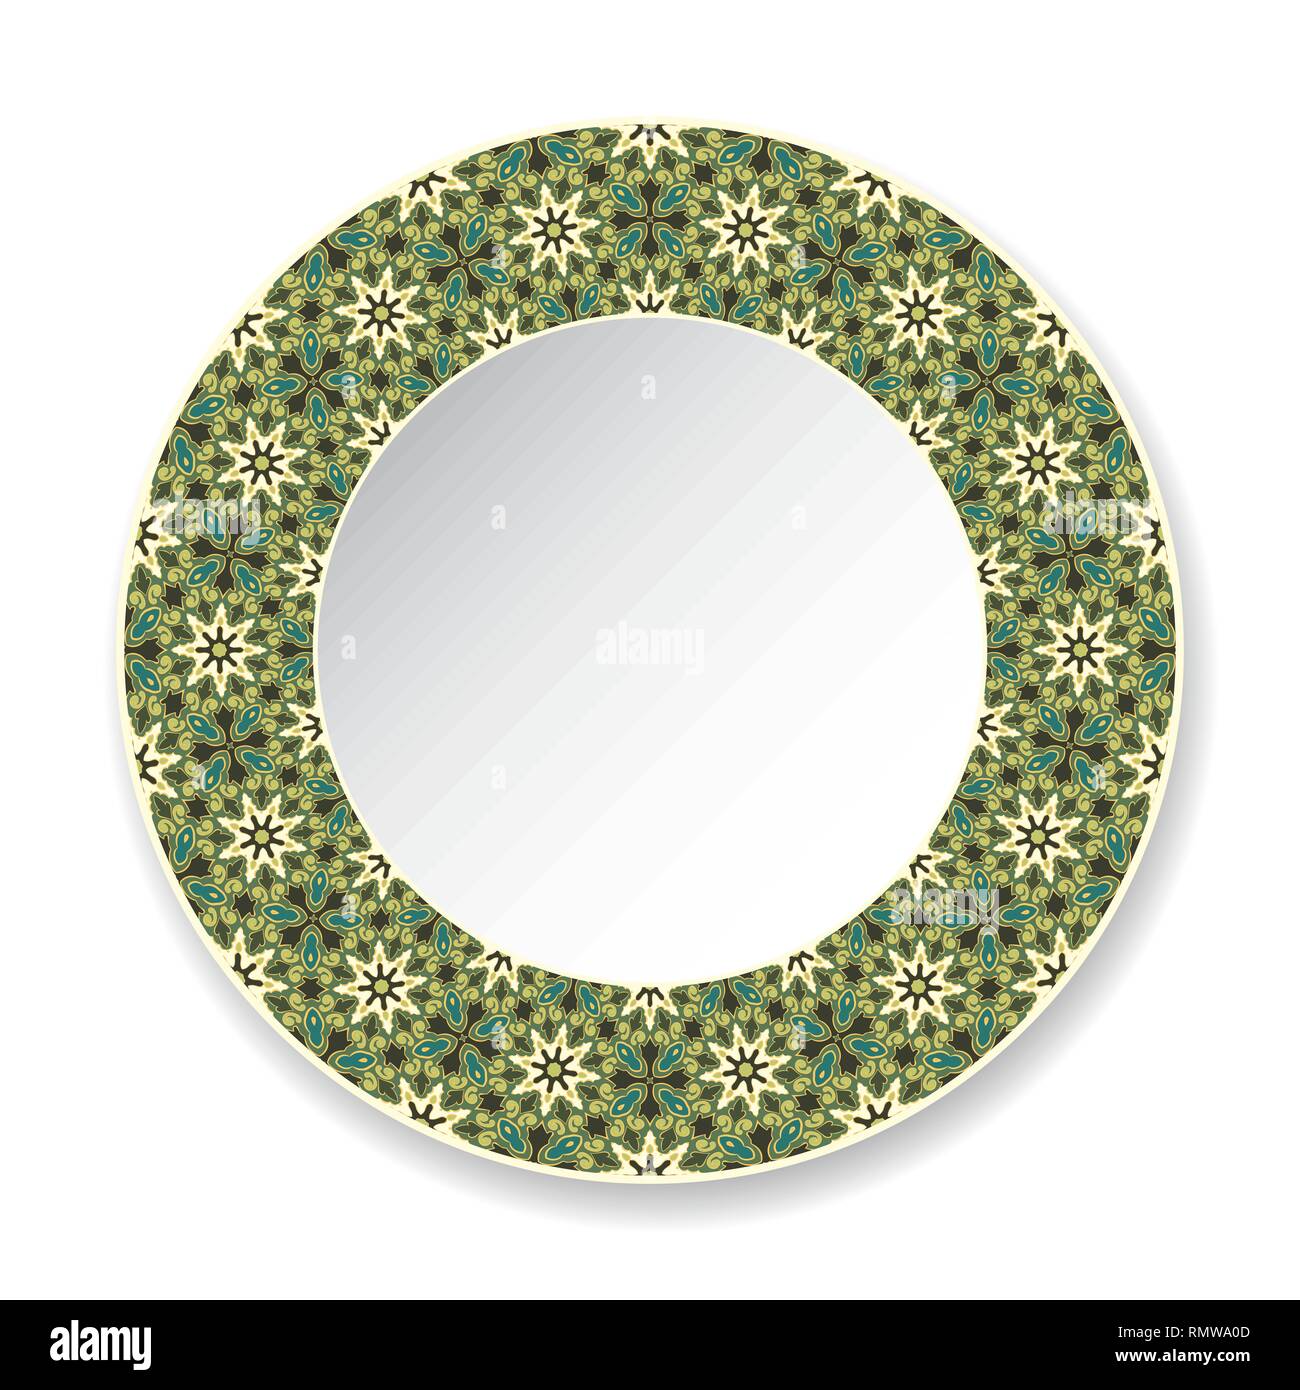 Designer Plate Round Shape In Check Graphics Stock Photo, Picture and  Royalty Free Image. Image 97215078.